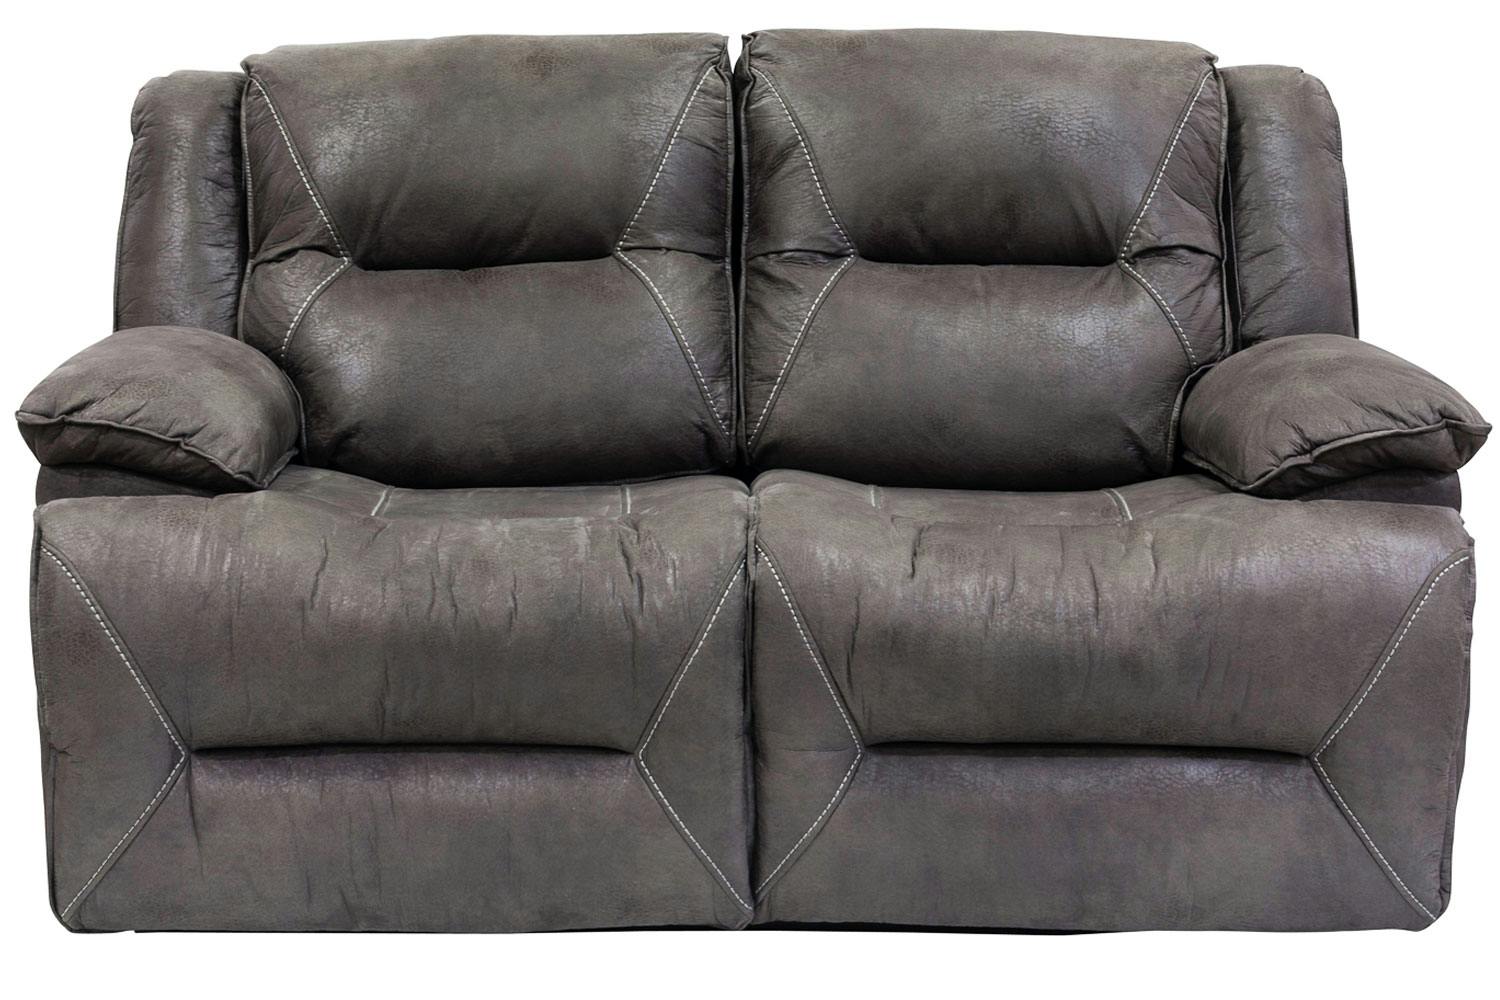 2 Seat Reclining Sofa Small Design But Style A Modern Two Seater